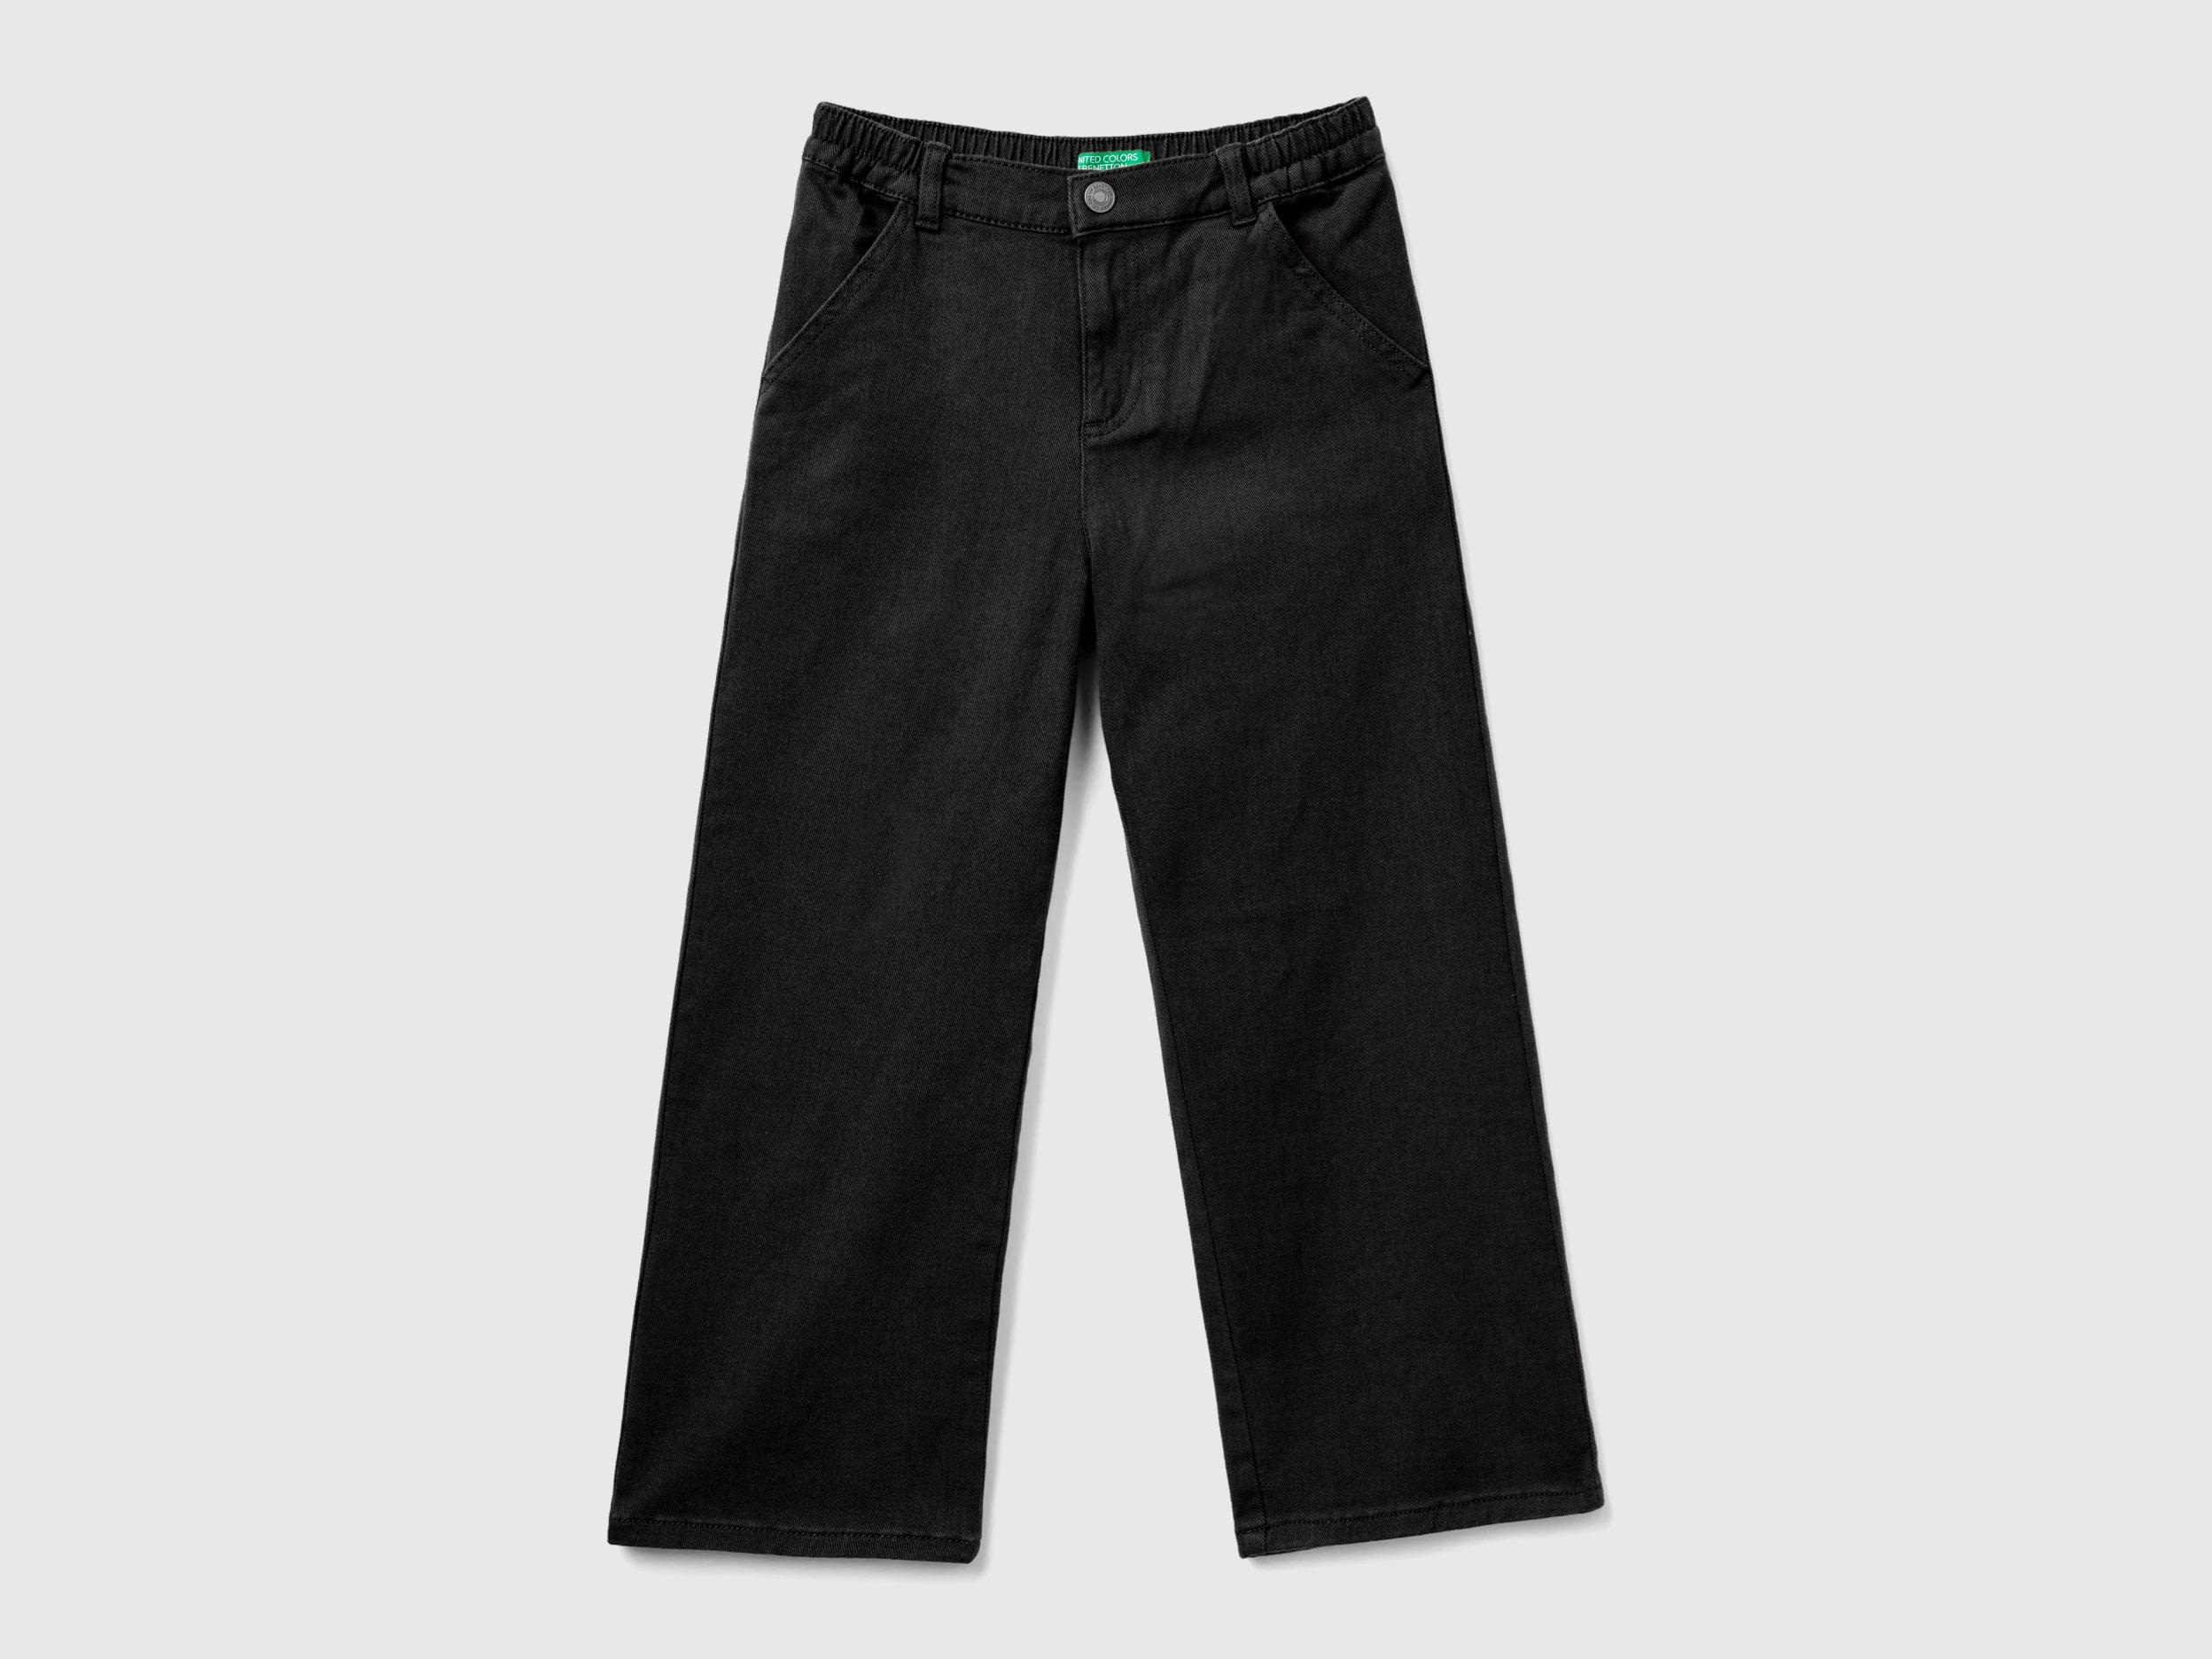 Benetton, High-waisted Straight Fit Trousers, size M, Black, Kids